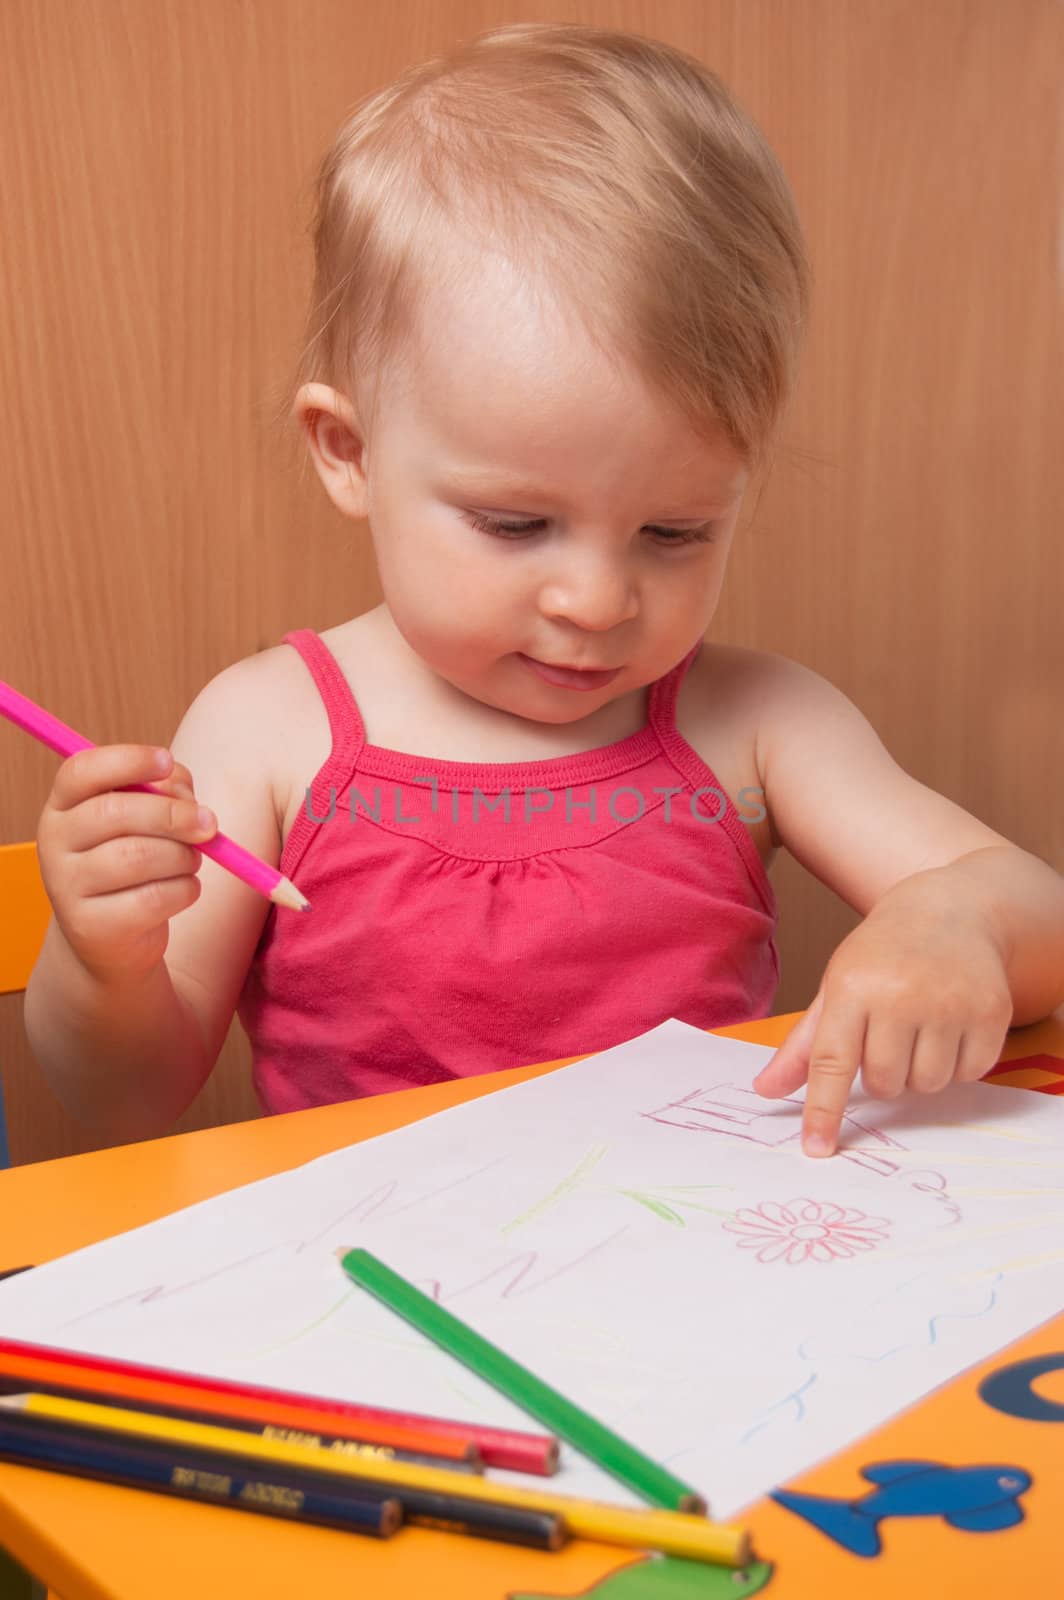 Baby girl drawing with pencils at table